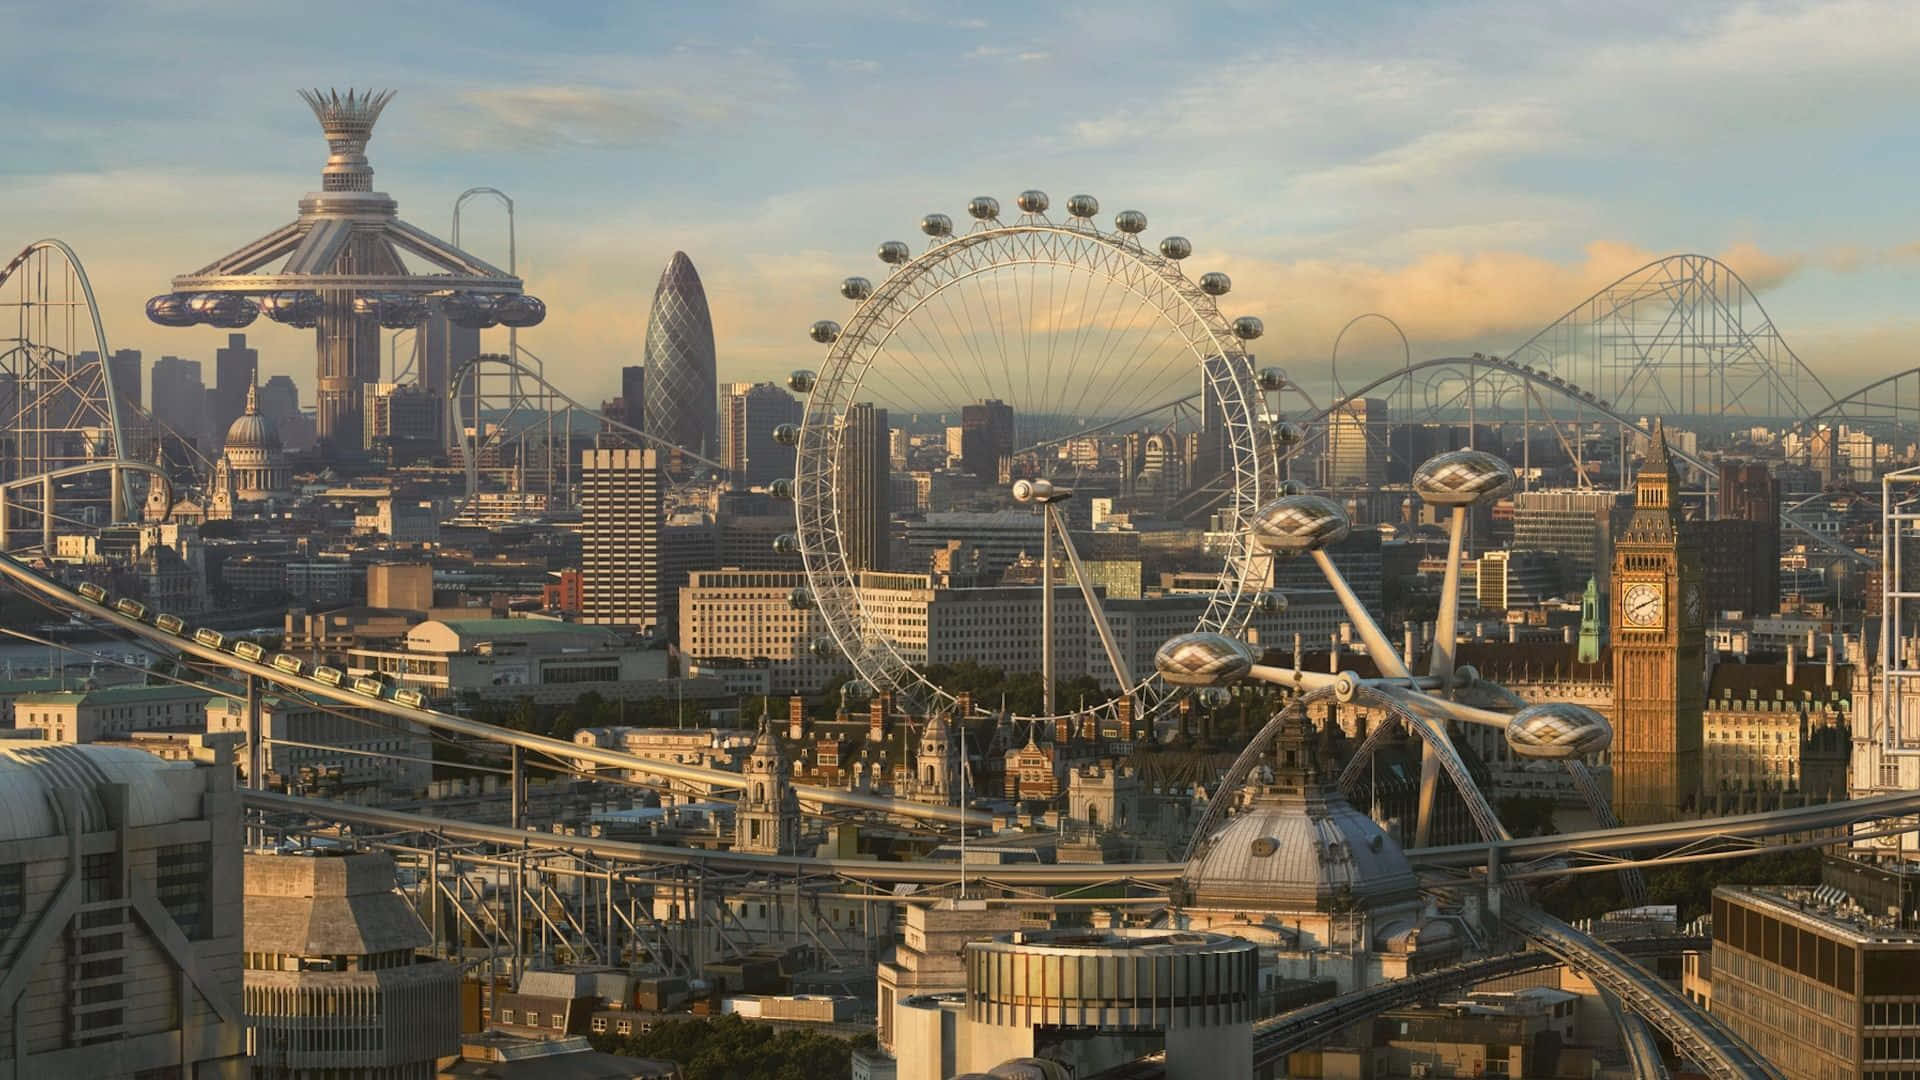 Futuristic City With A Ferris Wheel And Other Futuristic Buildings